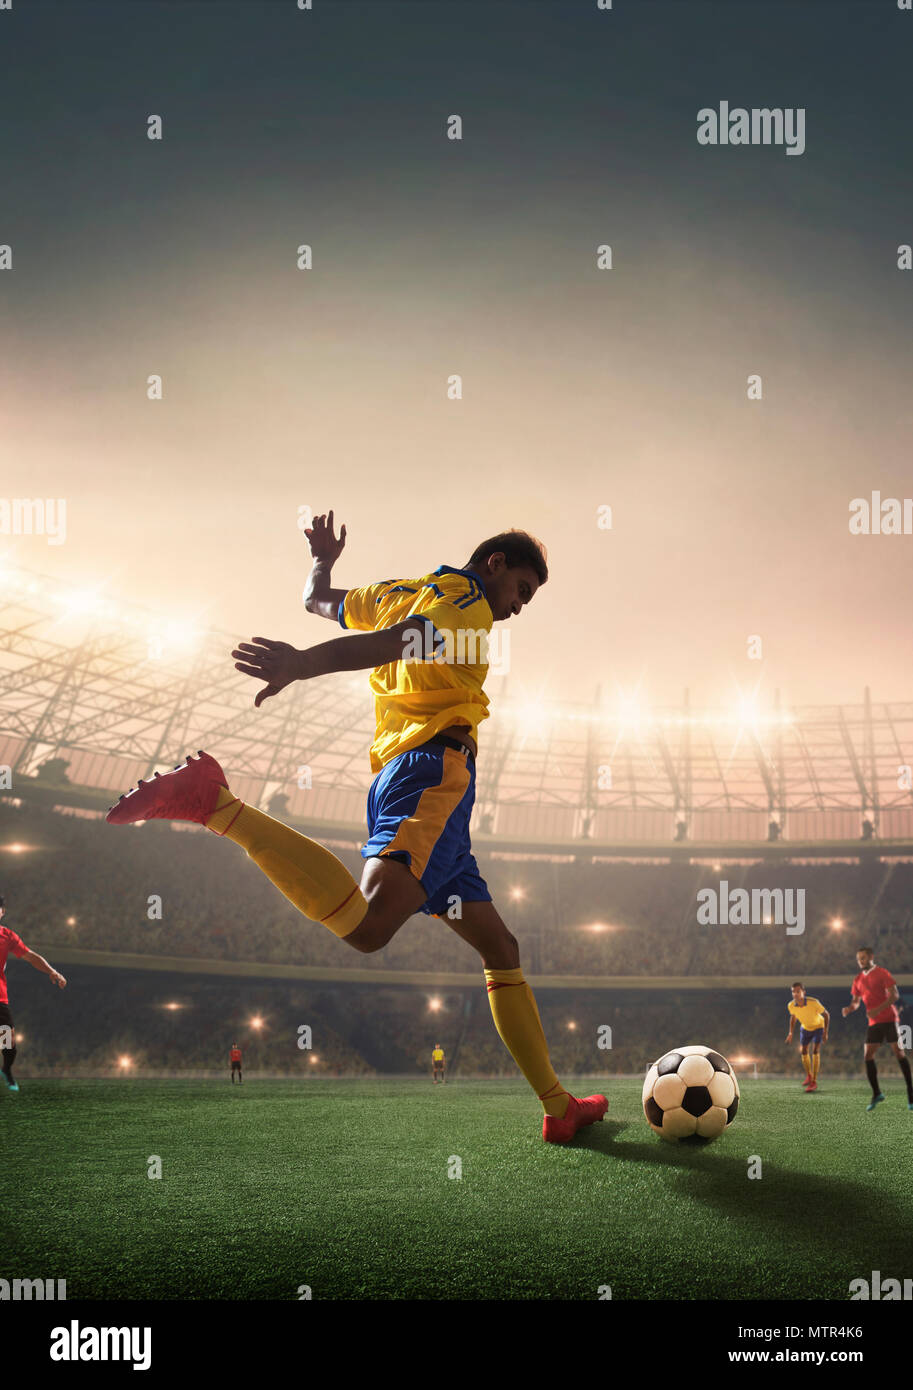 Football player shooting the ball at the goal. Stock Photo